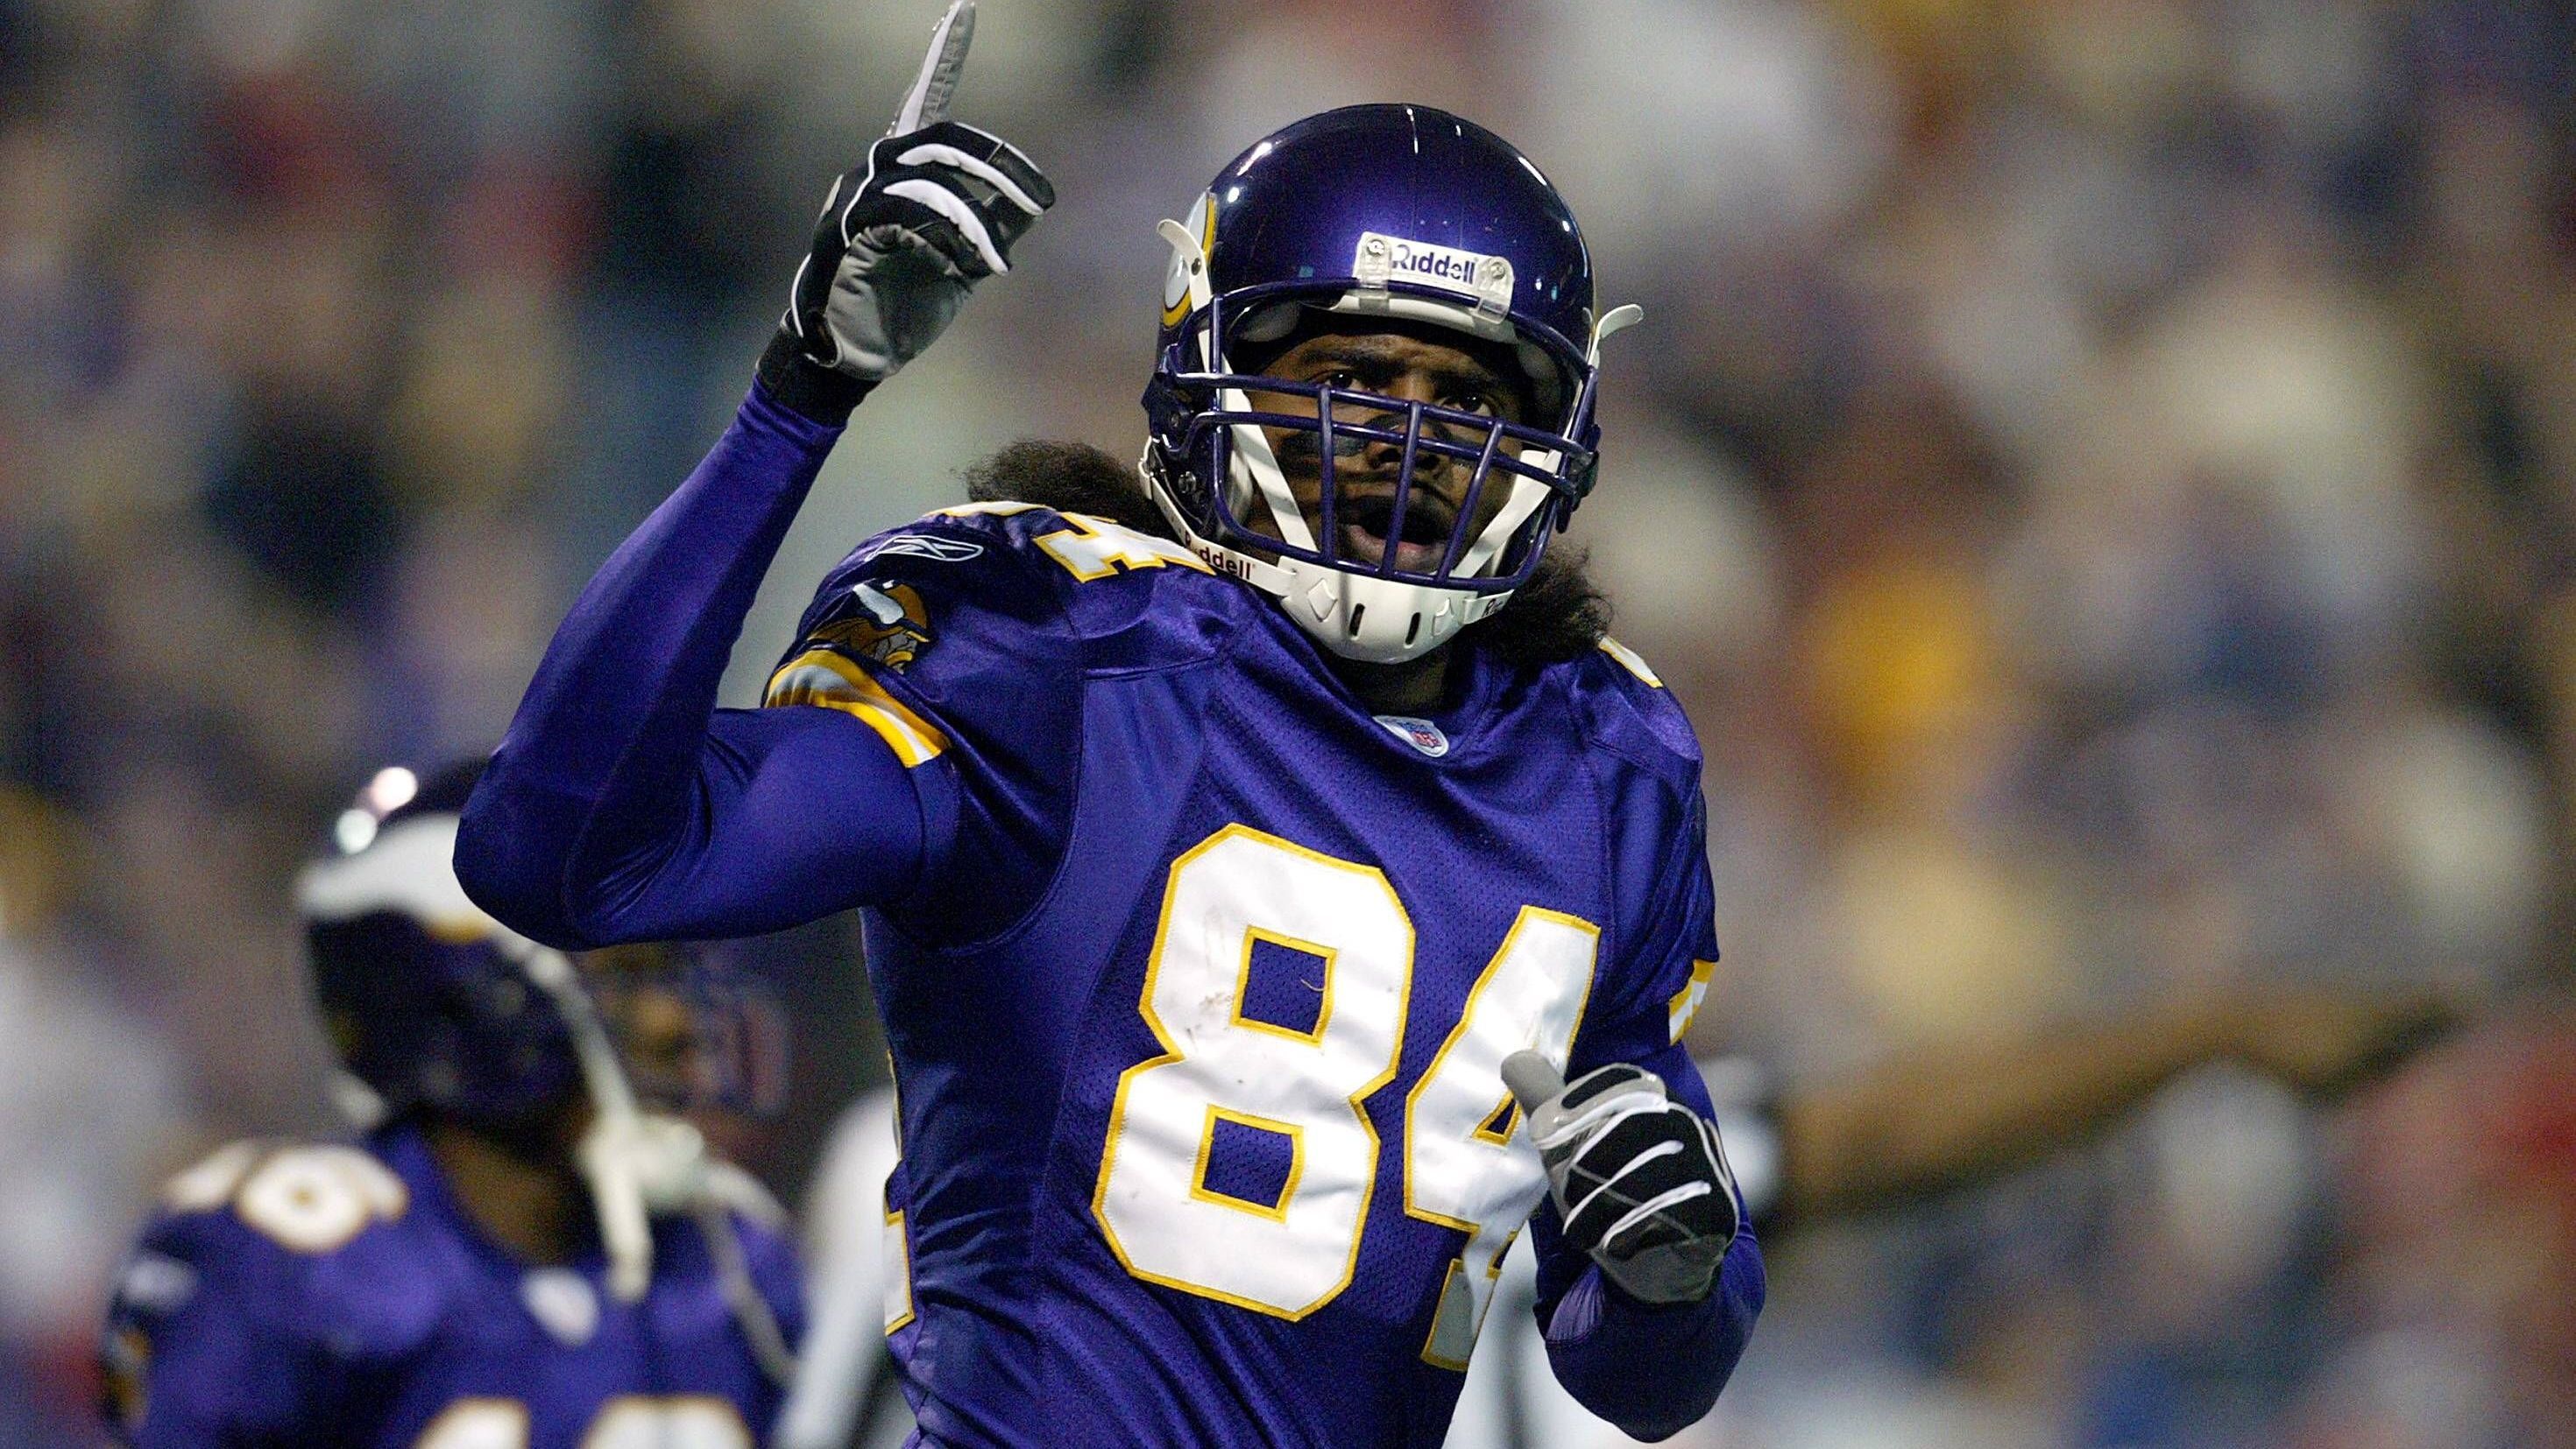 <strong>84: Randy Moss</strong><br>Team: Minnesota Vikings, Oakland Raiders, New England Patriots, Tennessee Titans, San Francisco 49ers<br>Position: Wide Receiver<br>Erfolge: Pro Football Hall of Famer, viermaliger First Team All-Pro, sechsmaliger Pro Bowler<br>Honorable Mentions: Shannon Sharpe, Antonio Brown